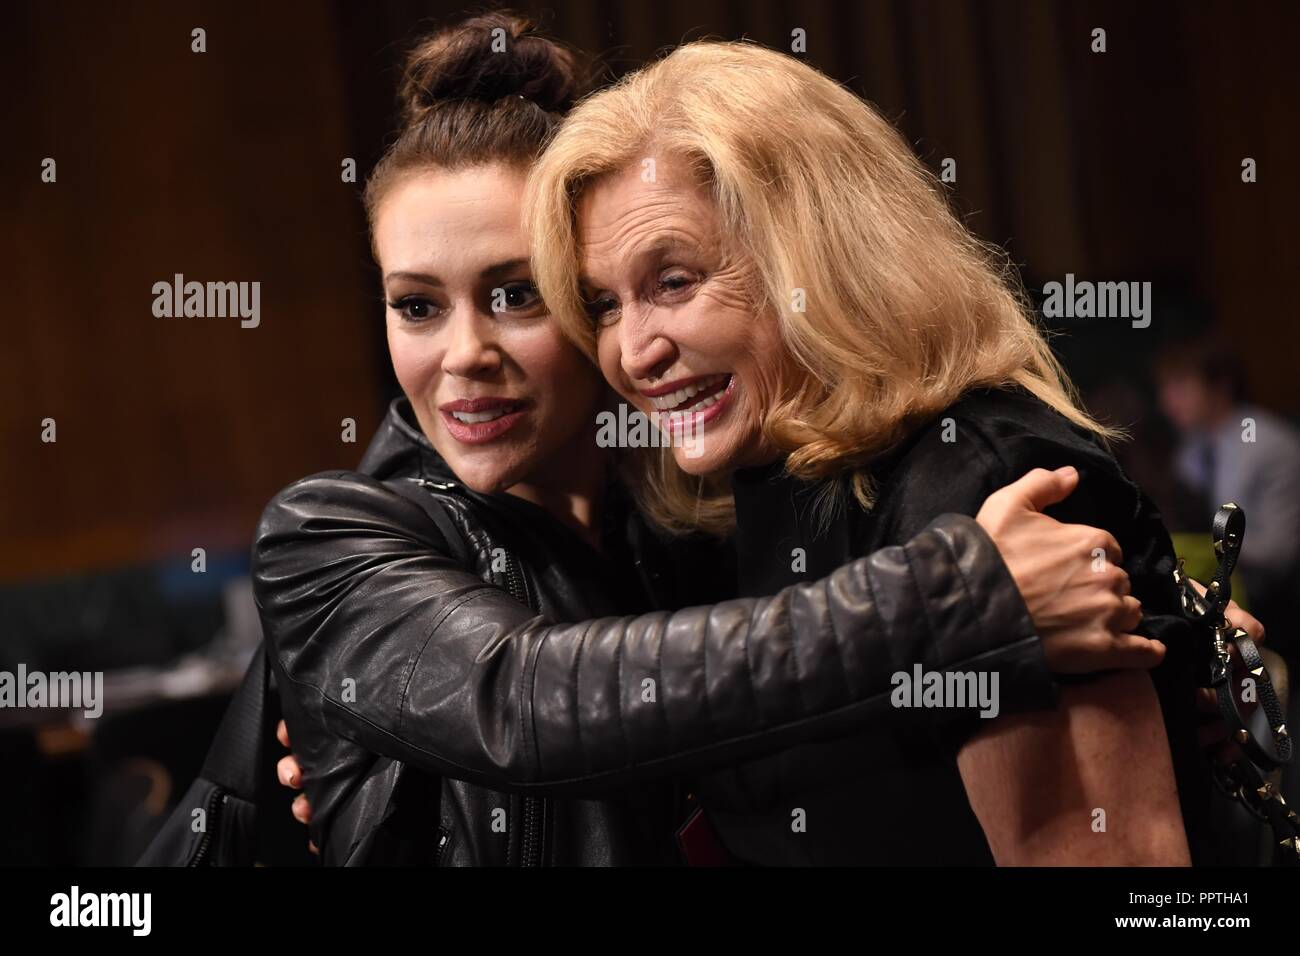 United States. 27th Sep, 2018. Actress Alyssa Milano, left, hugs Rep. Carolyn Maloney, D-N.Y., in the hearing room before the start of Dr. Christine Blasey Ford's appearance in the Senate Judiciary Committee to testify on the nomination of Brett M. Kavanaugh to be an associate justice of the Supreme Court of the United States. Credit: Pool Via Cnp/Media Punch/Alamy Live News Stock Photo